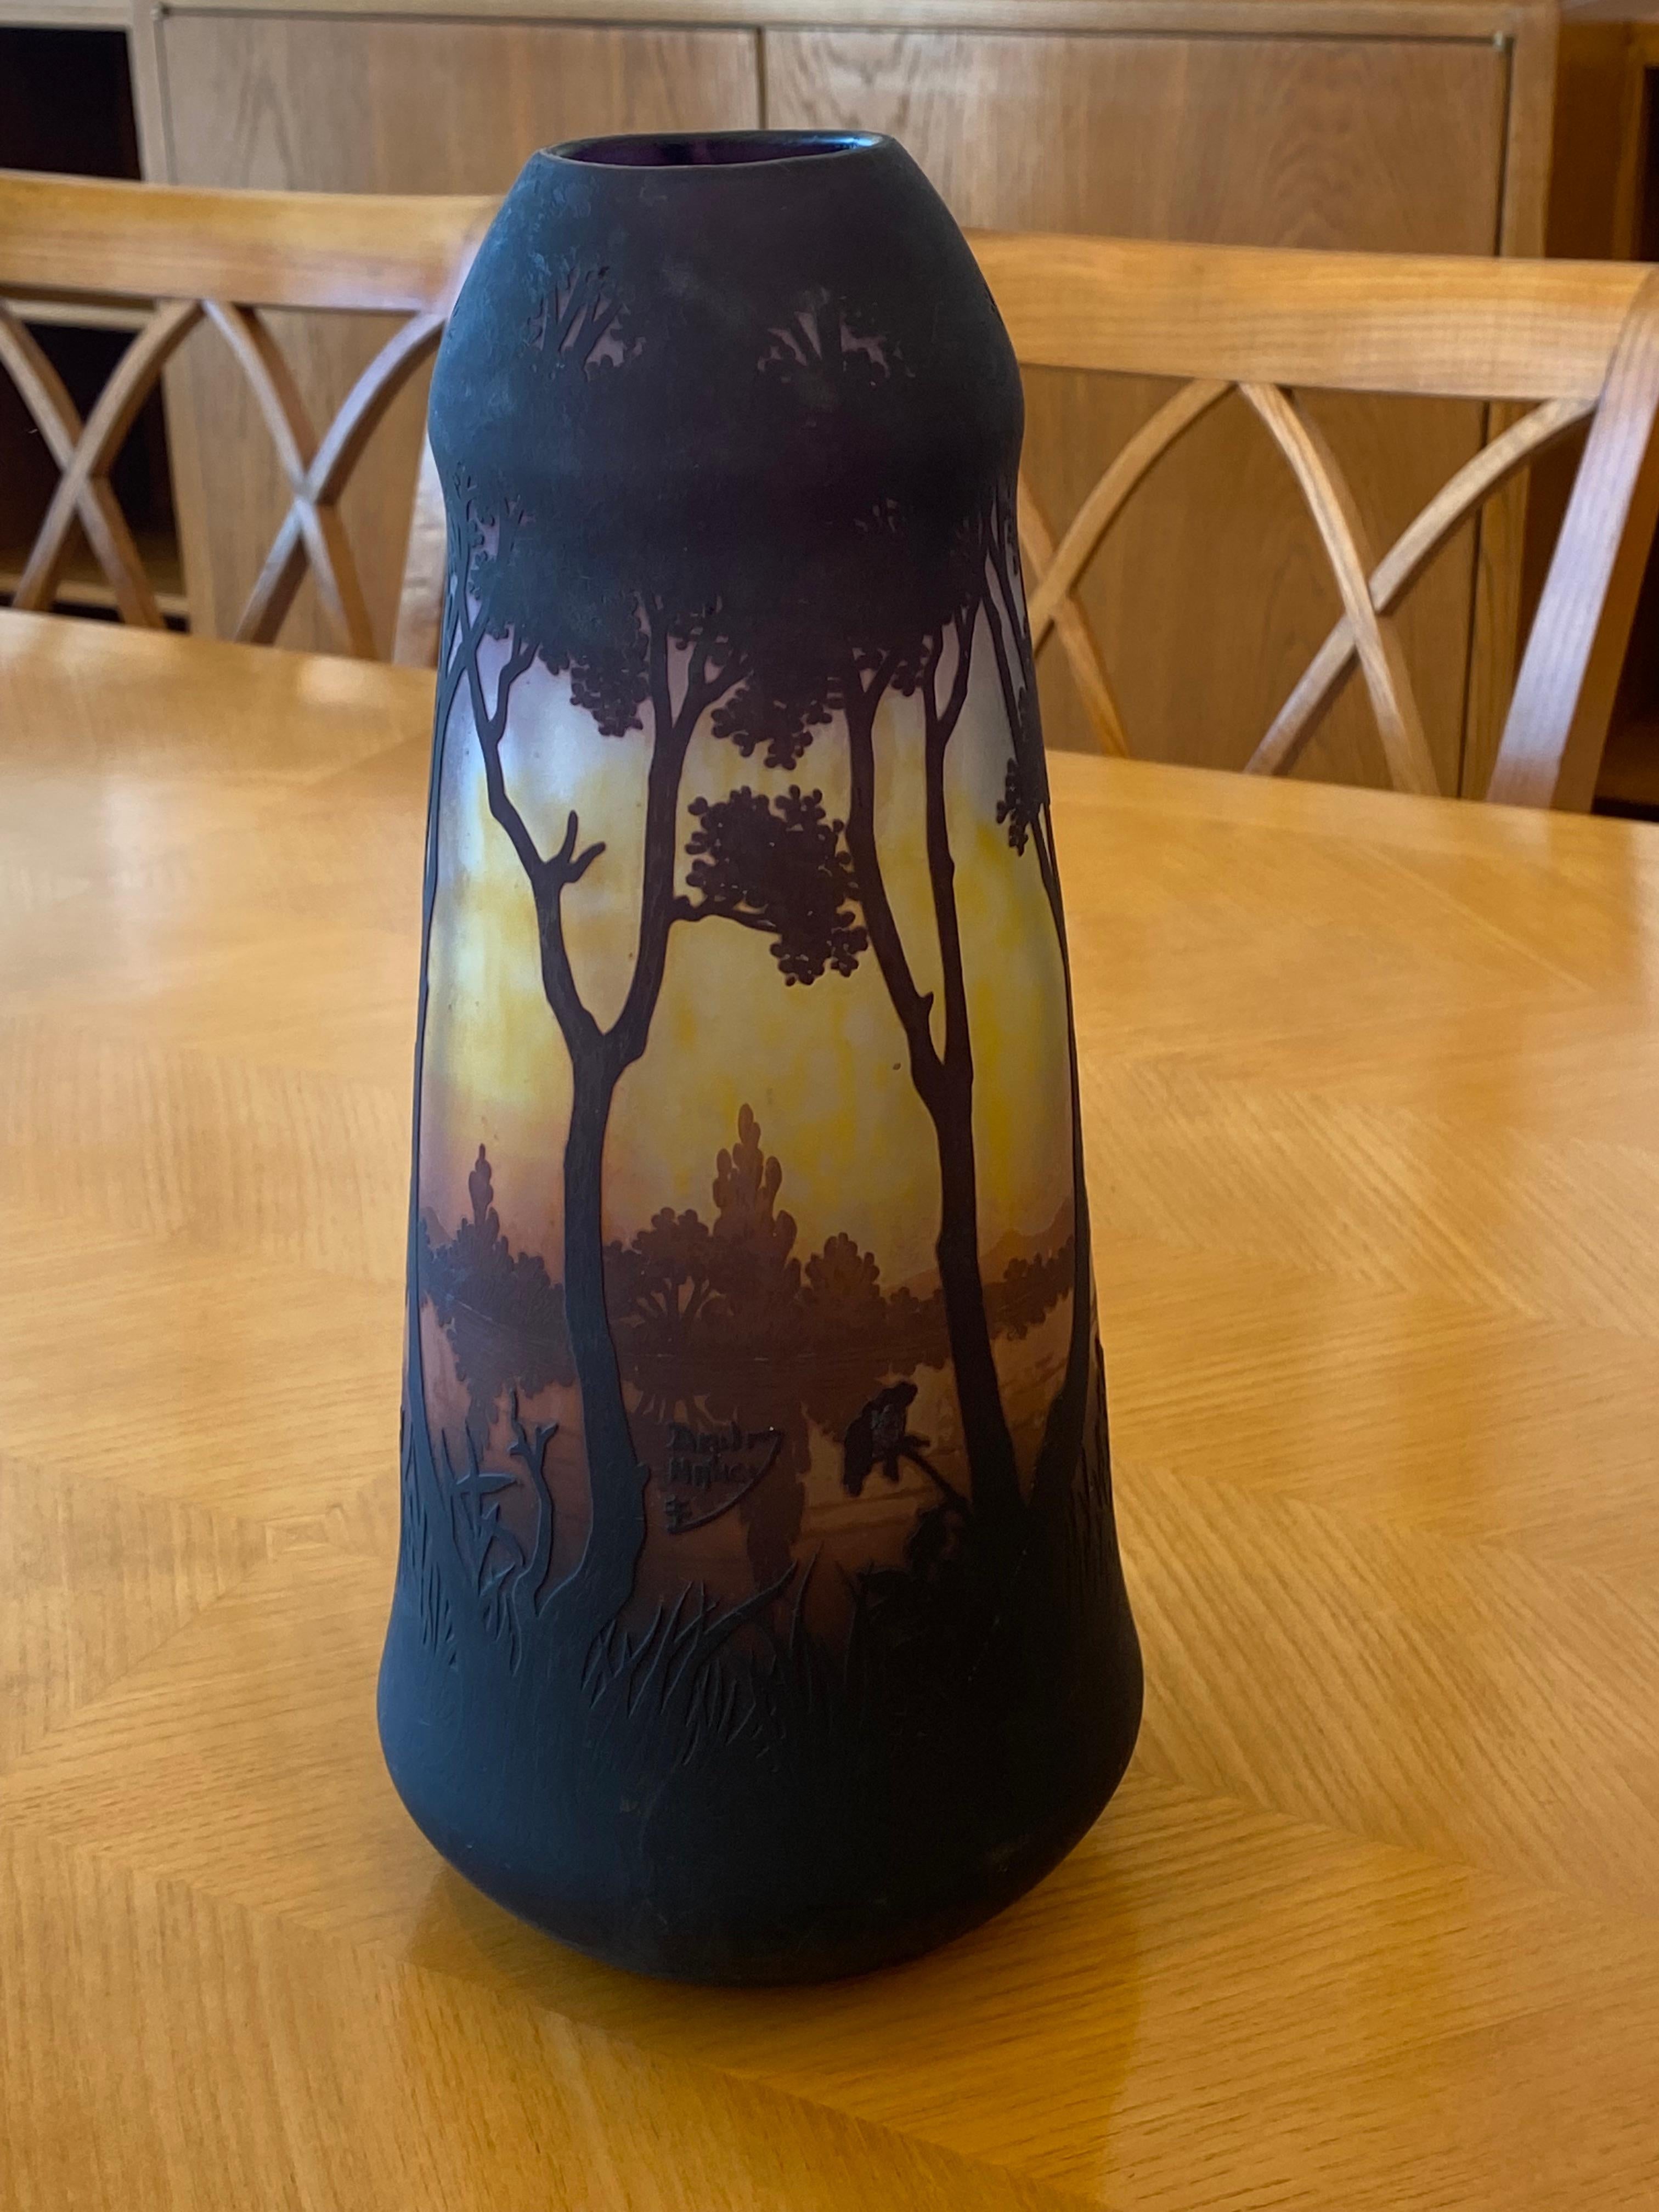 An exquisite Art Deco Cameo glass vase in dark yellow tones with a scenic view in brown hues. Signed by Daum-Nancy.
Made in France.
Circa: 1920.